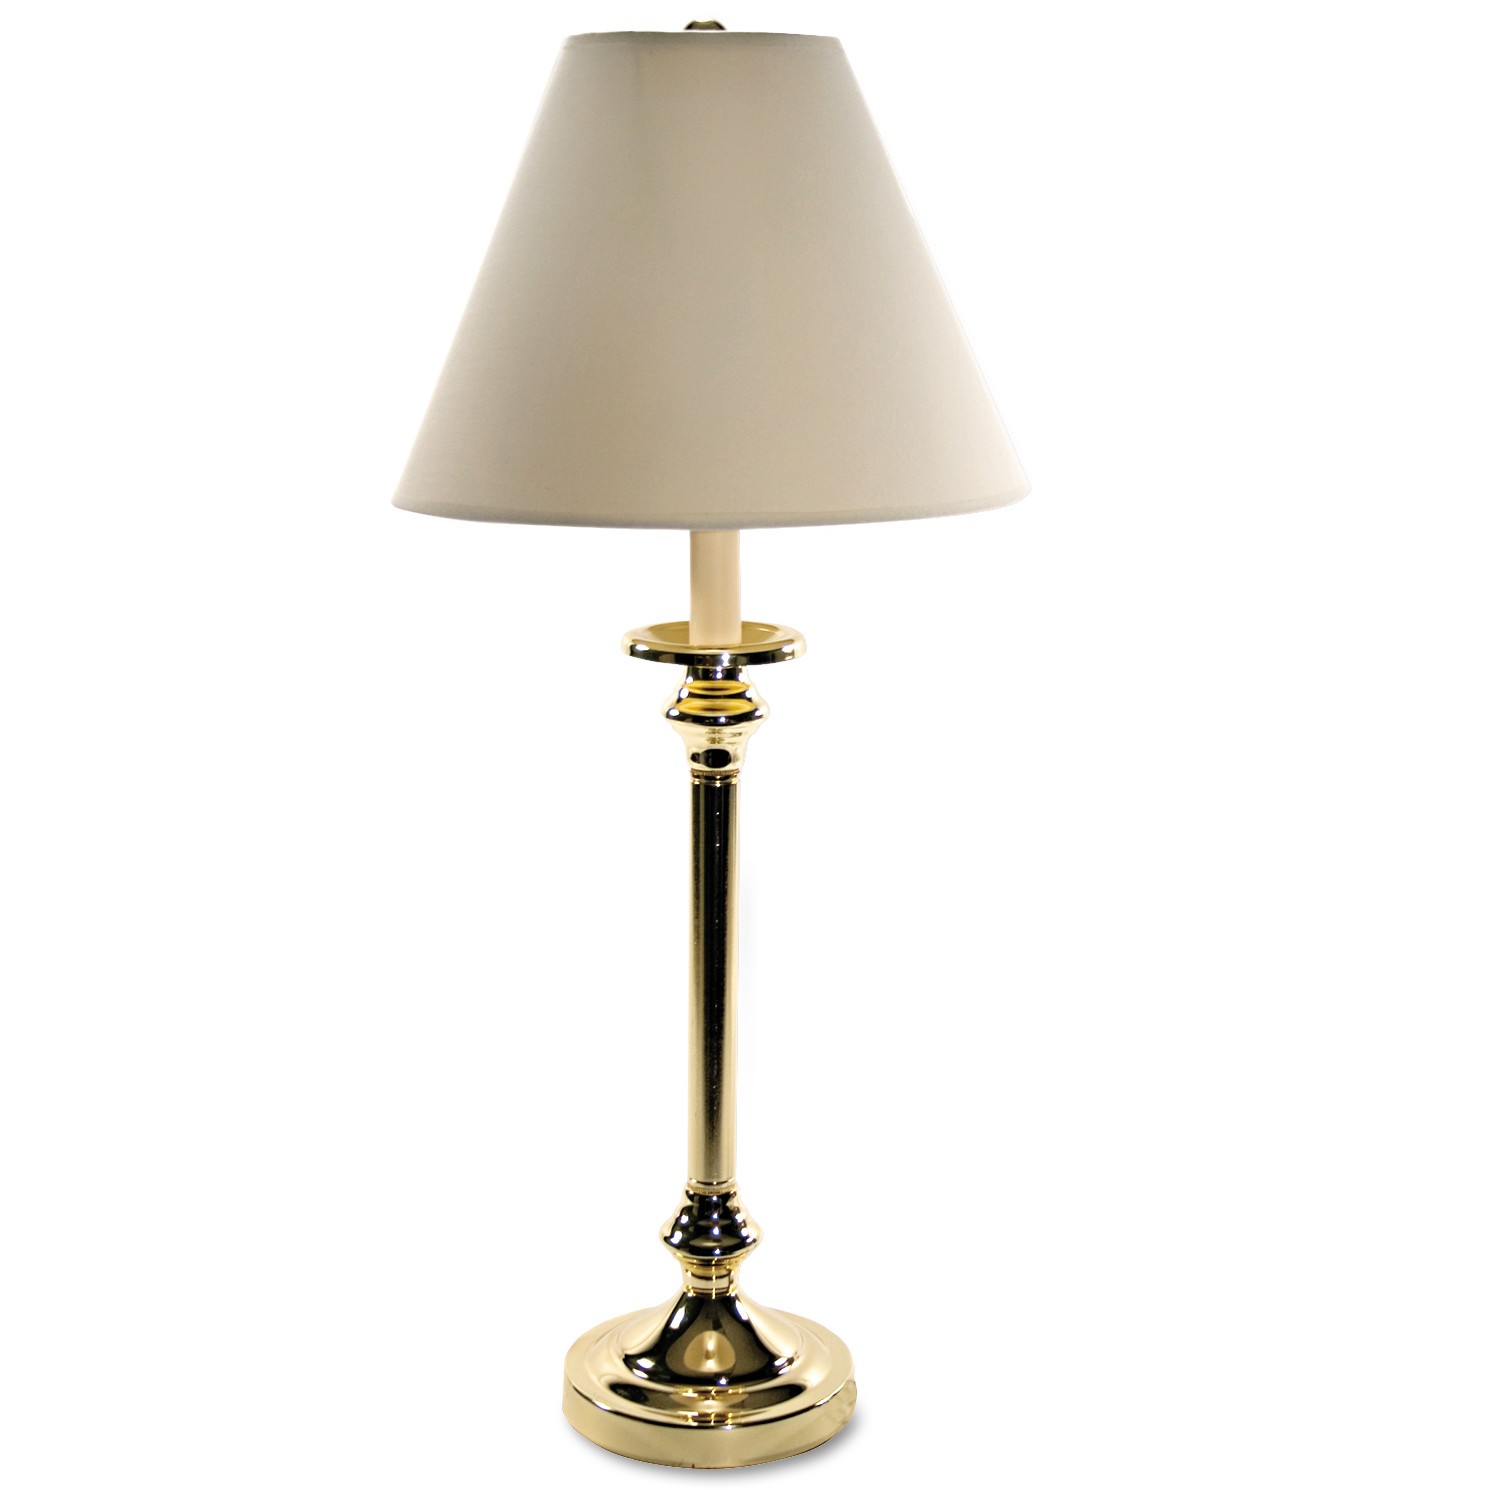 Ledu Candlestick 27" H Table Lamp with Empire Shade